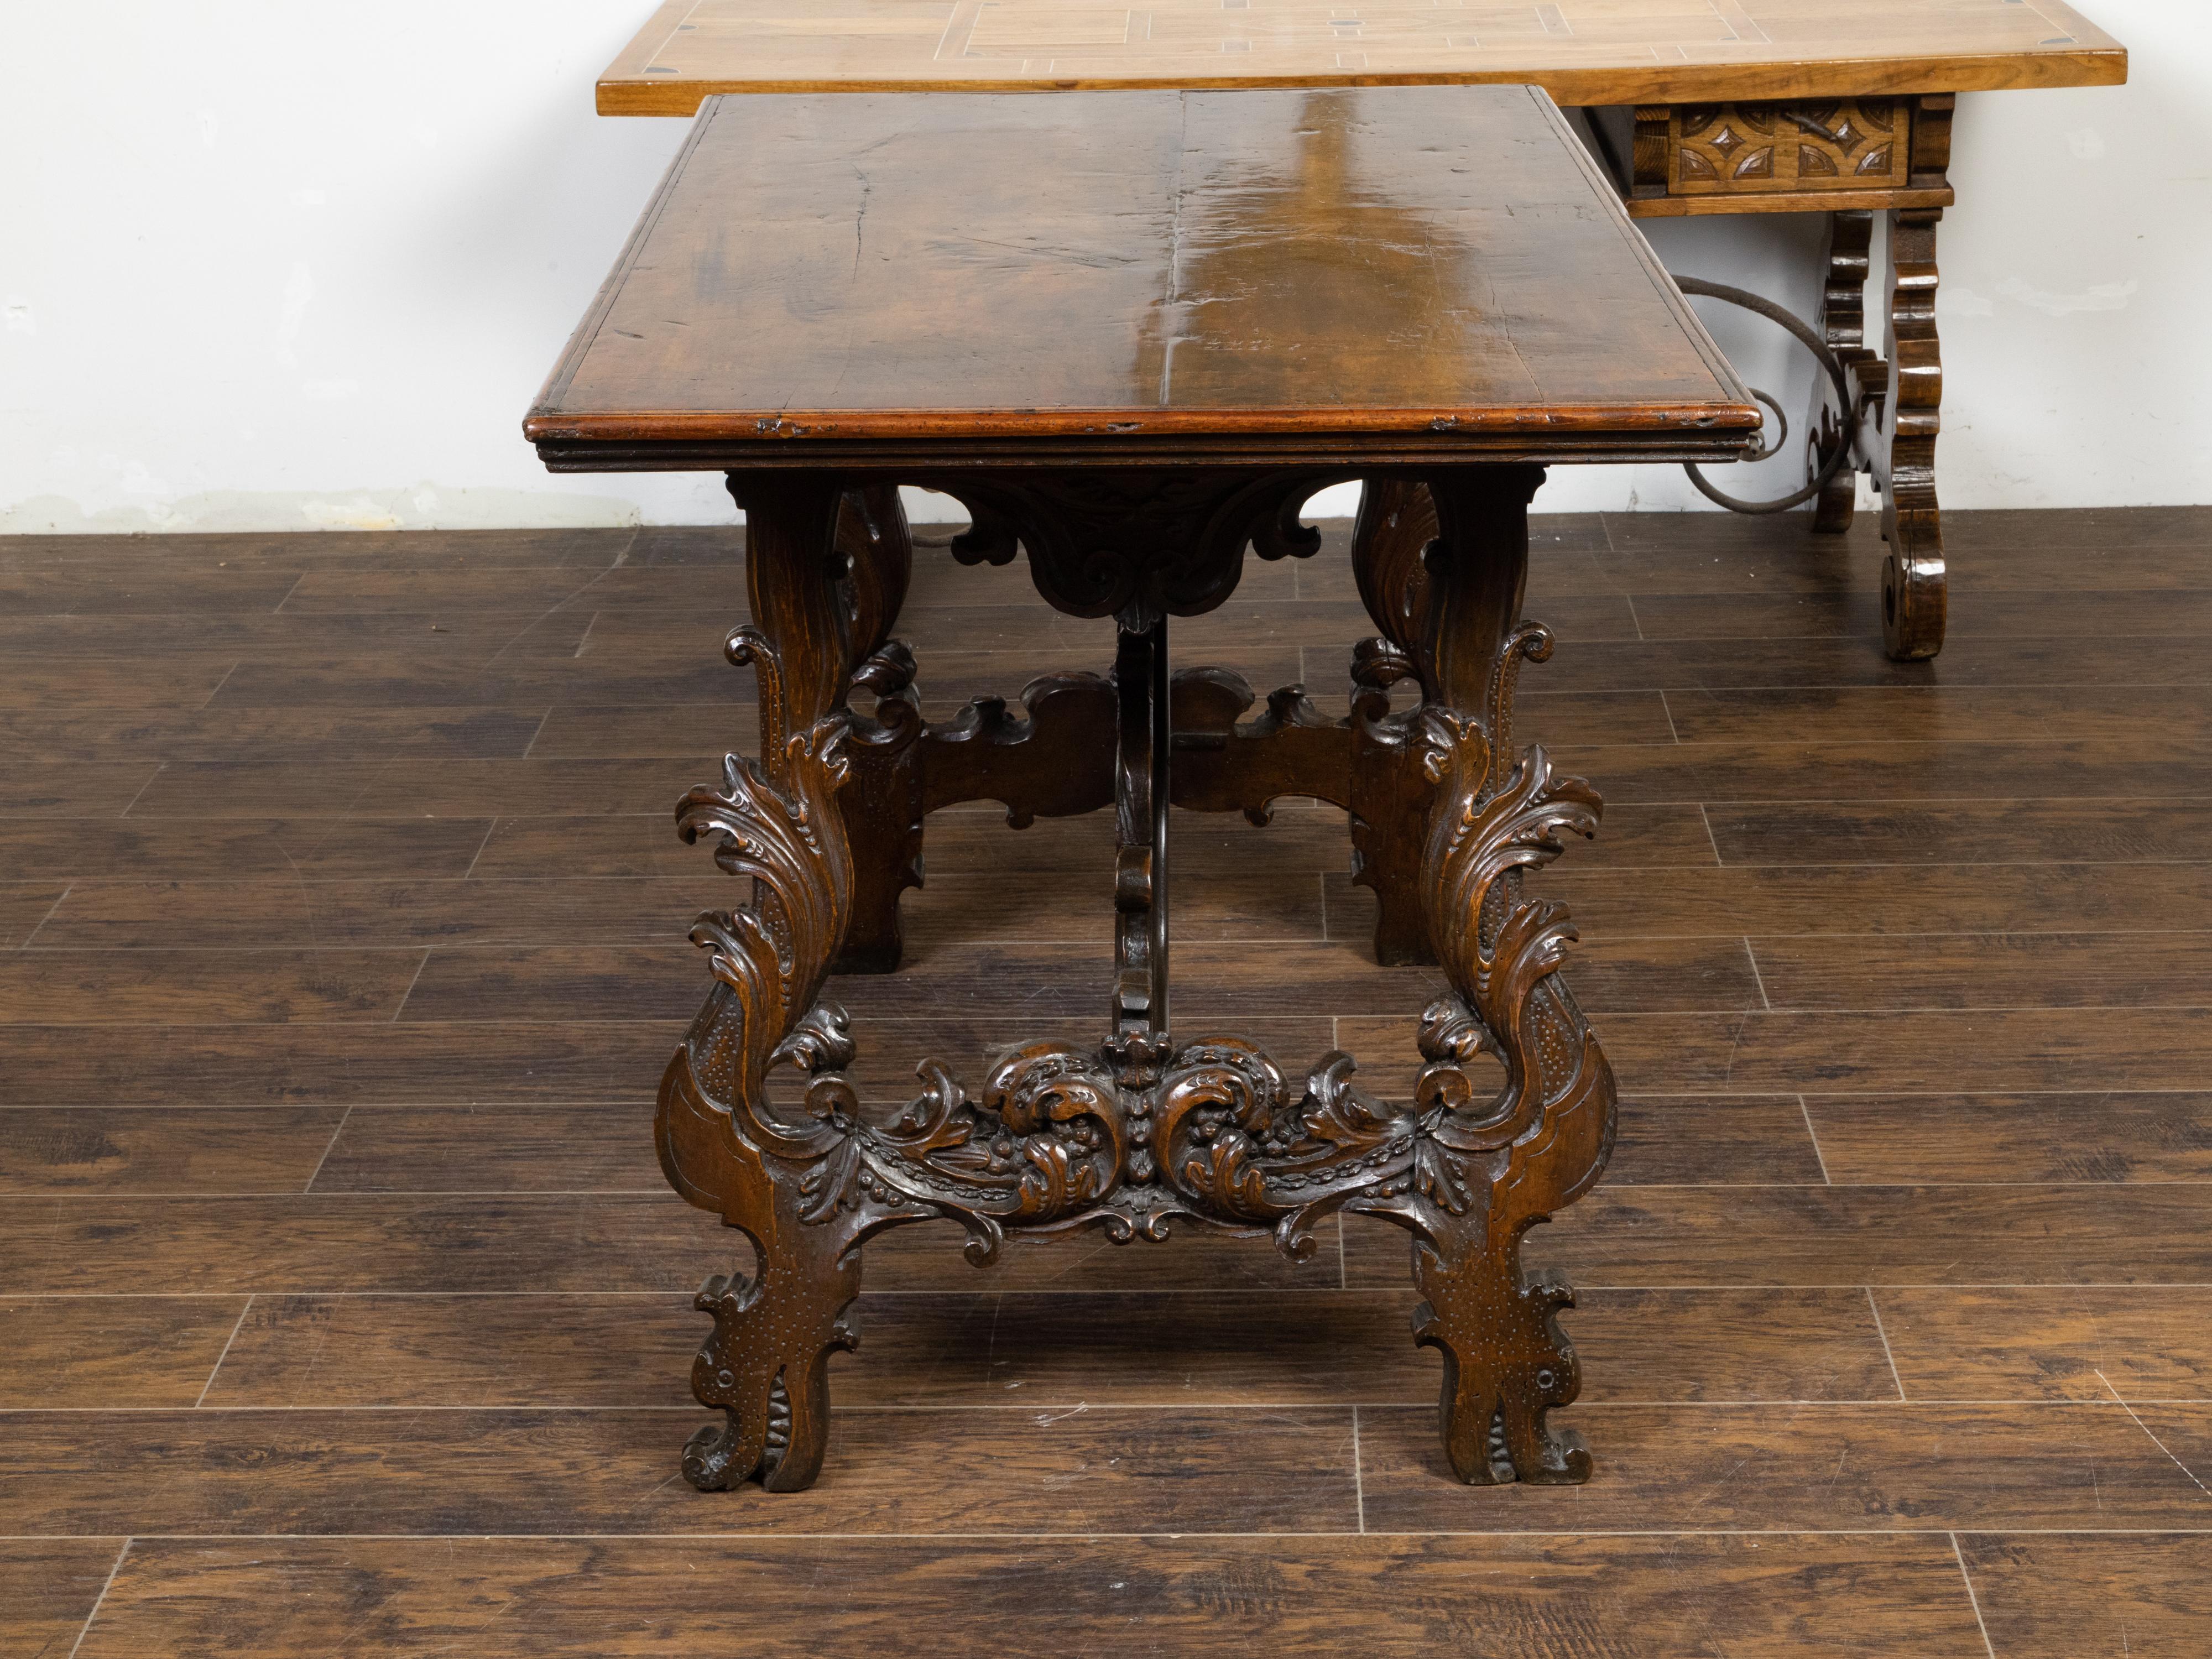 Italian 18th Century Baroque Walnut Fratino Console Table with Carved Foliage In Good Condition For Sale In Atlanta, GA